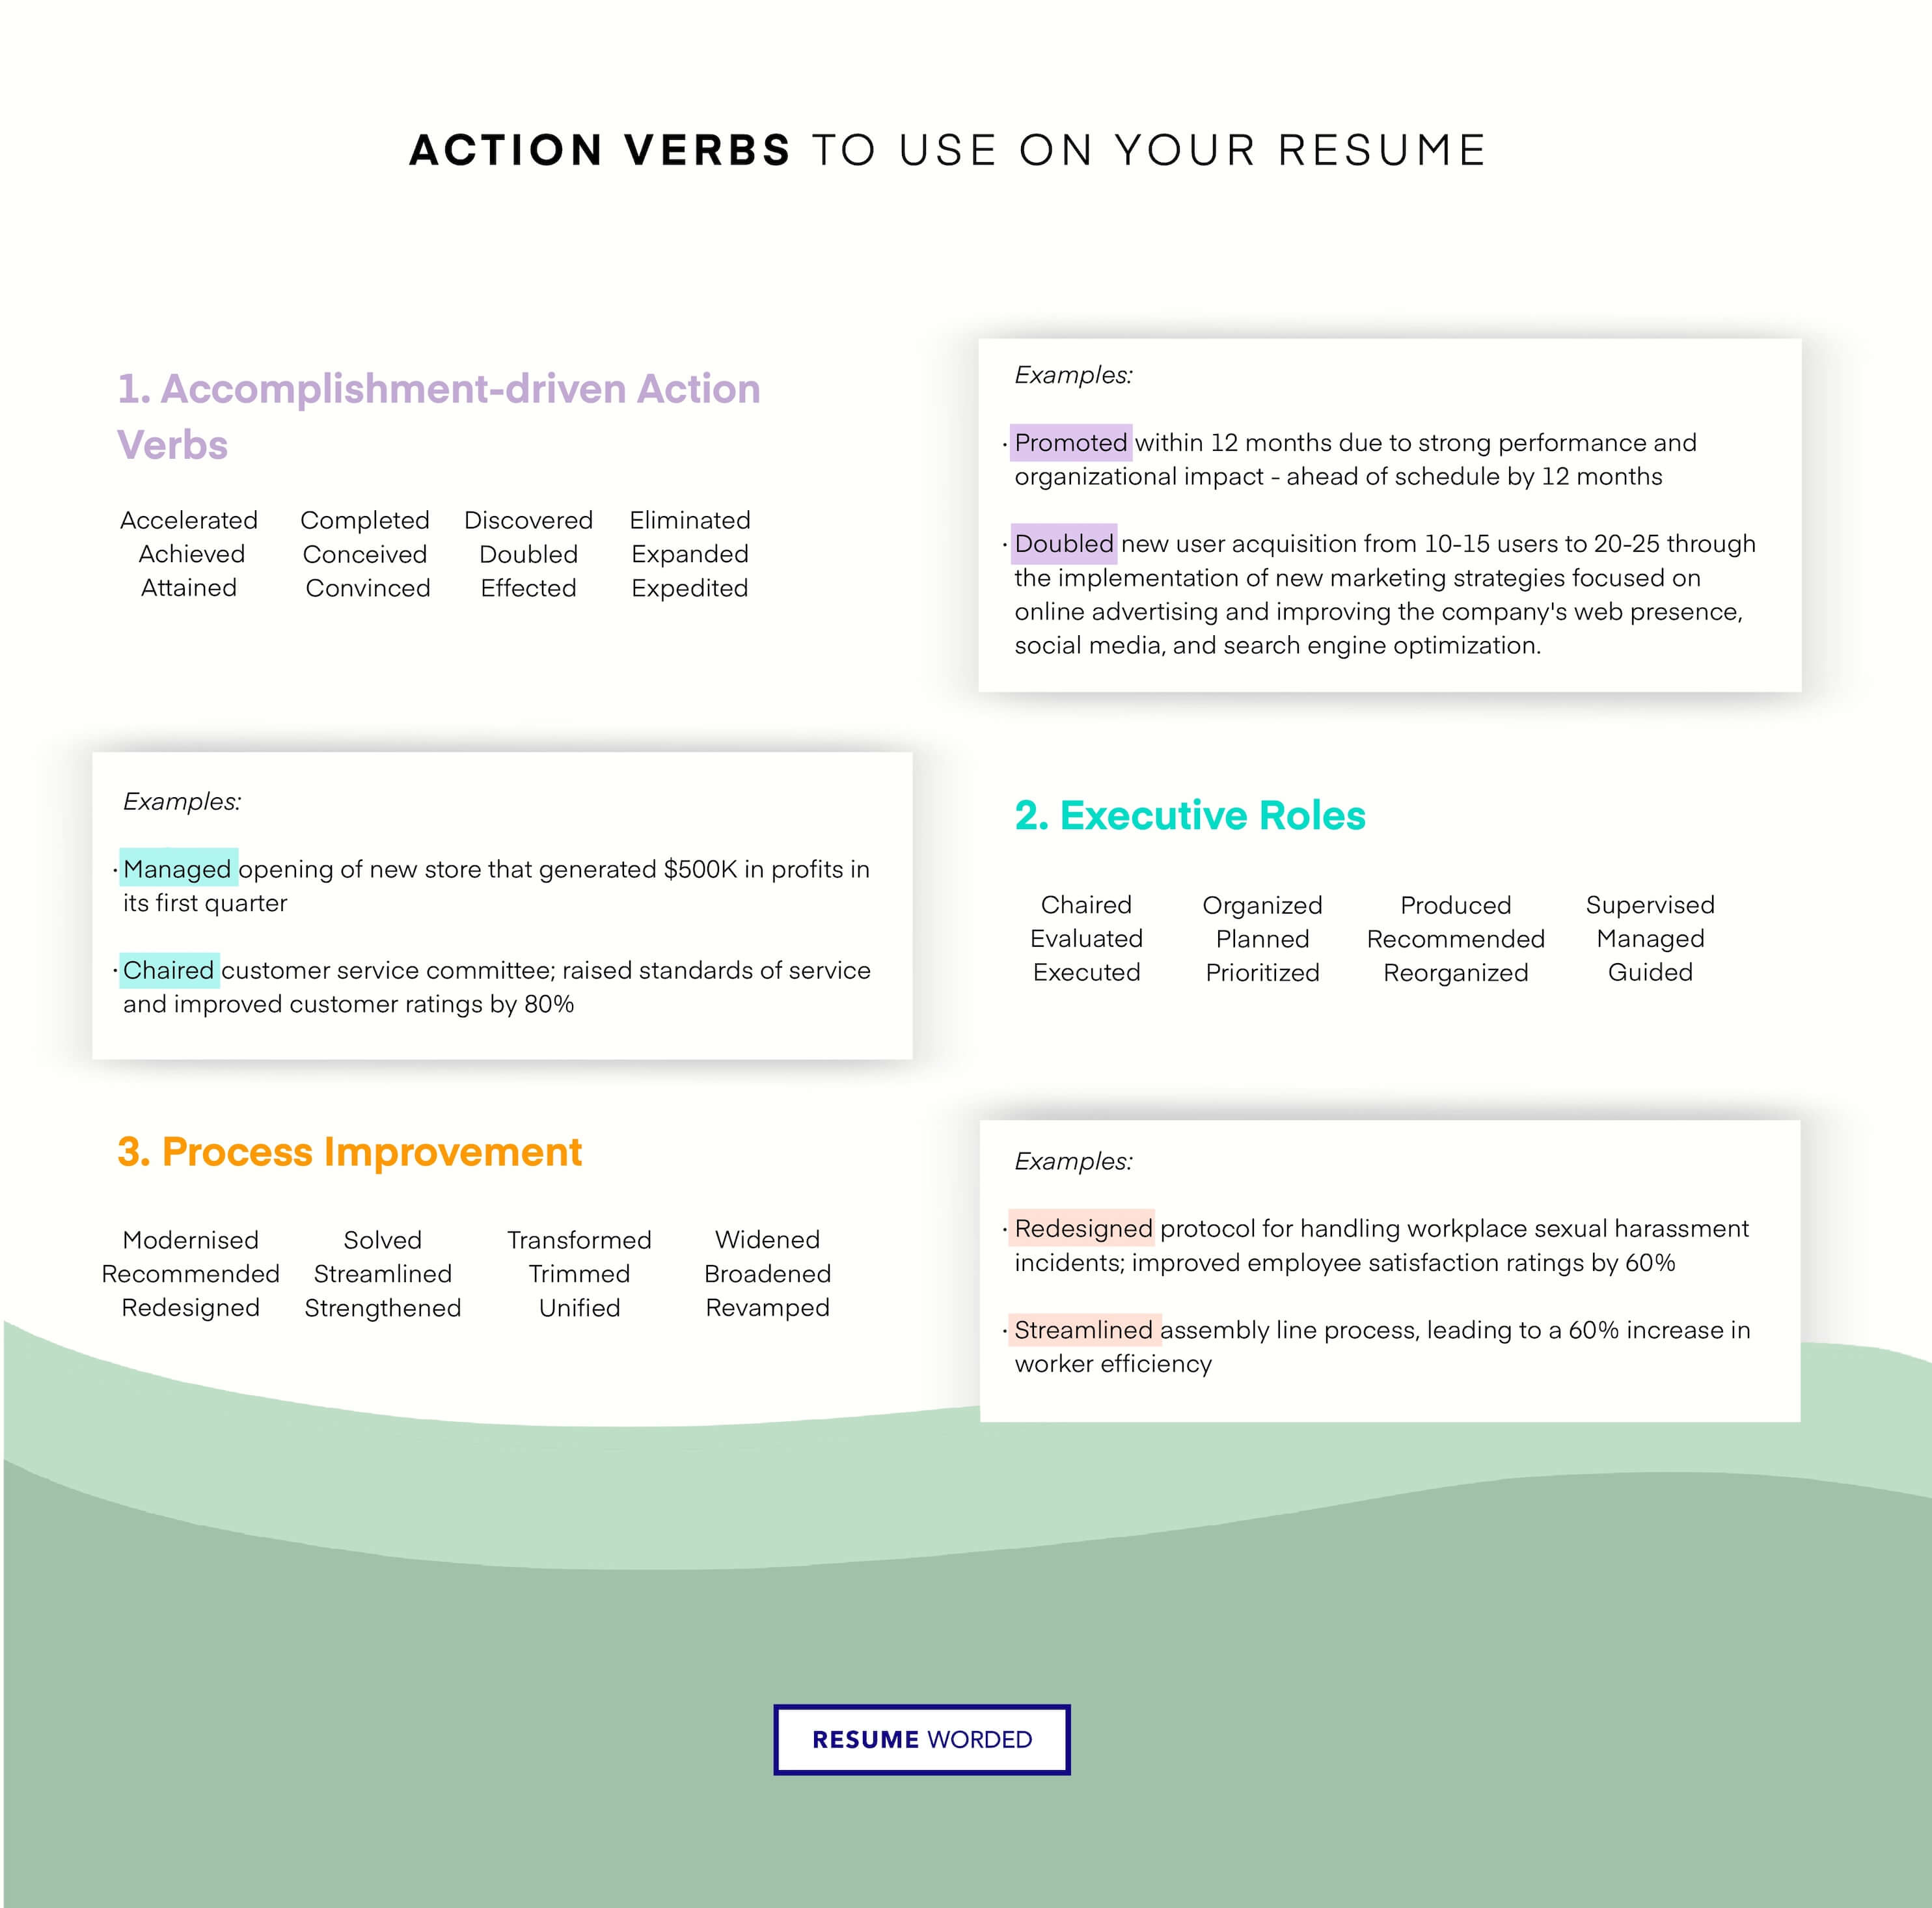 Uses marketing-focused action verbs to describe achievements - Marketing Director Resume